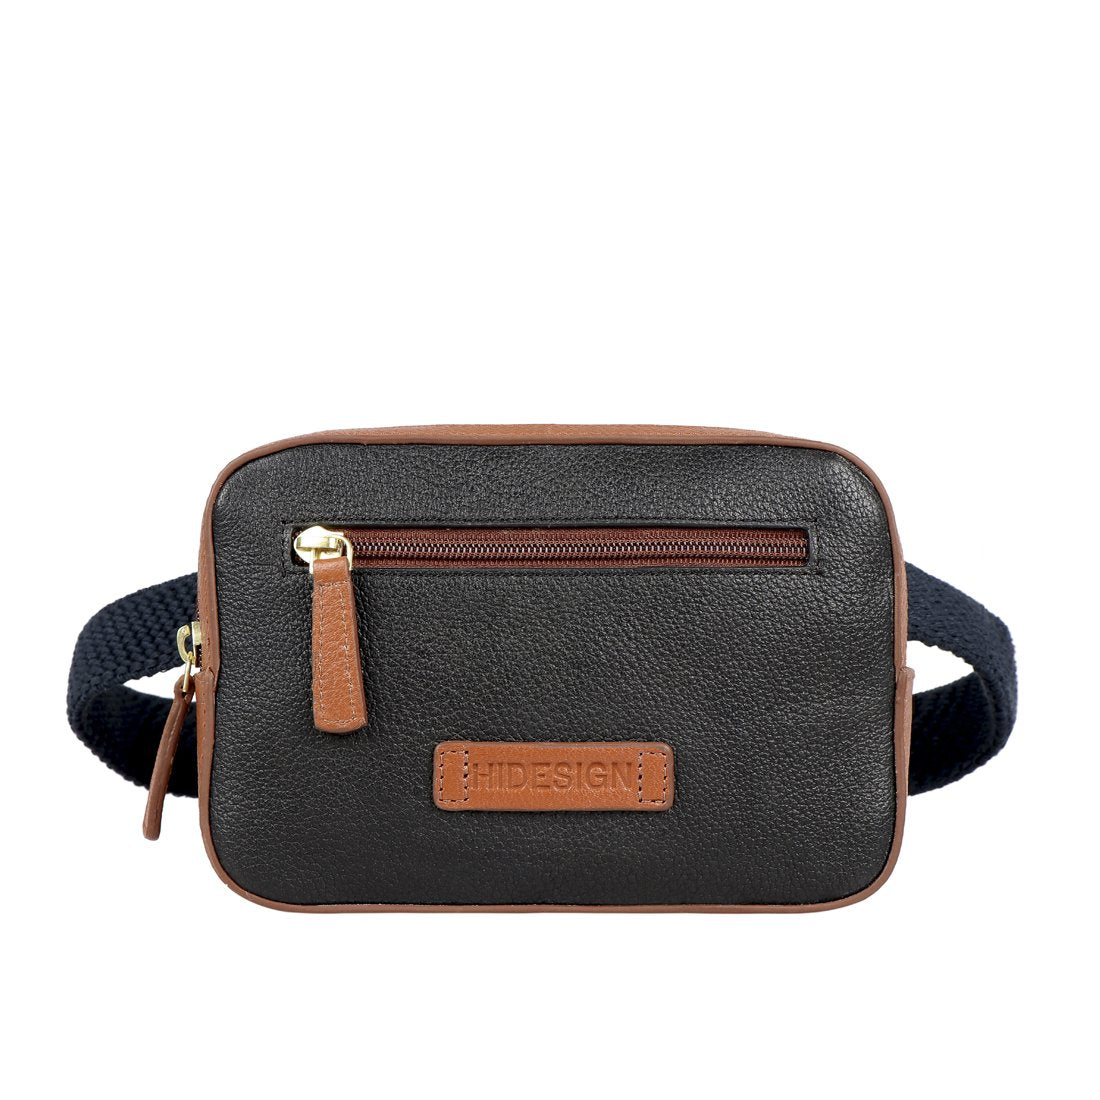 HIDESIGN - Introducing the Zazen bag from our Zen collection